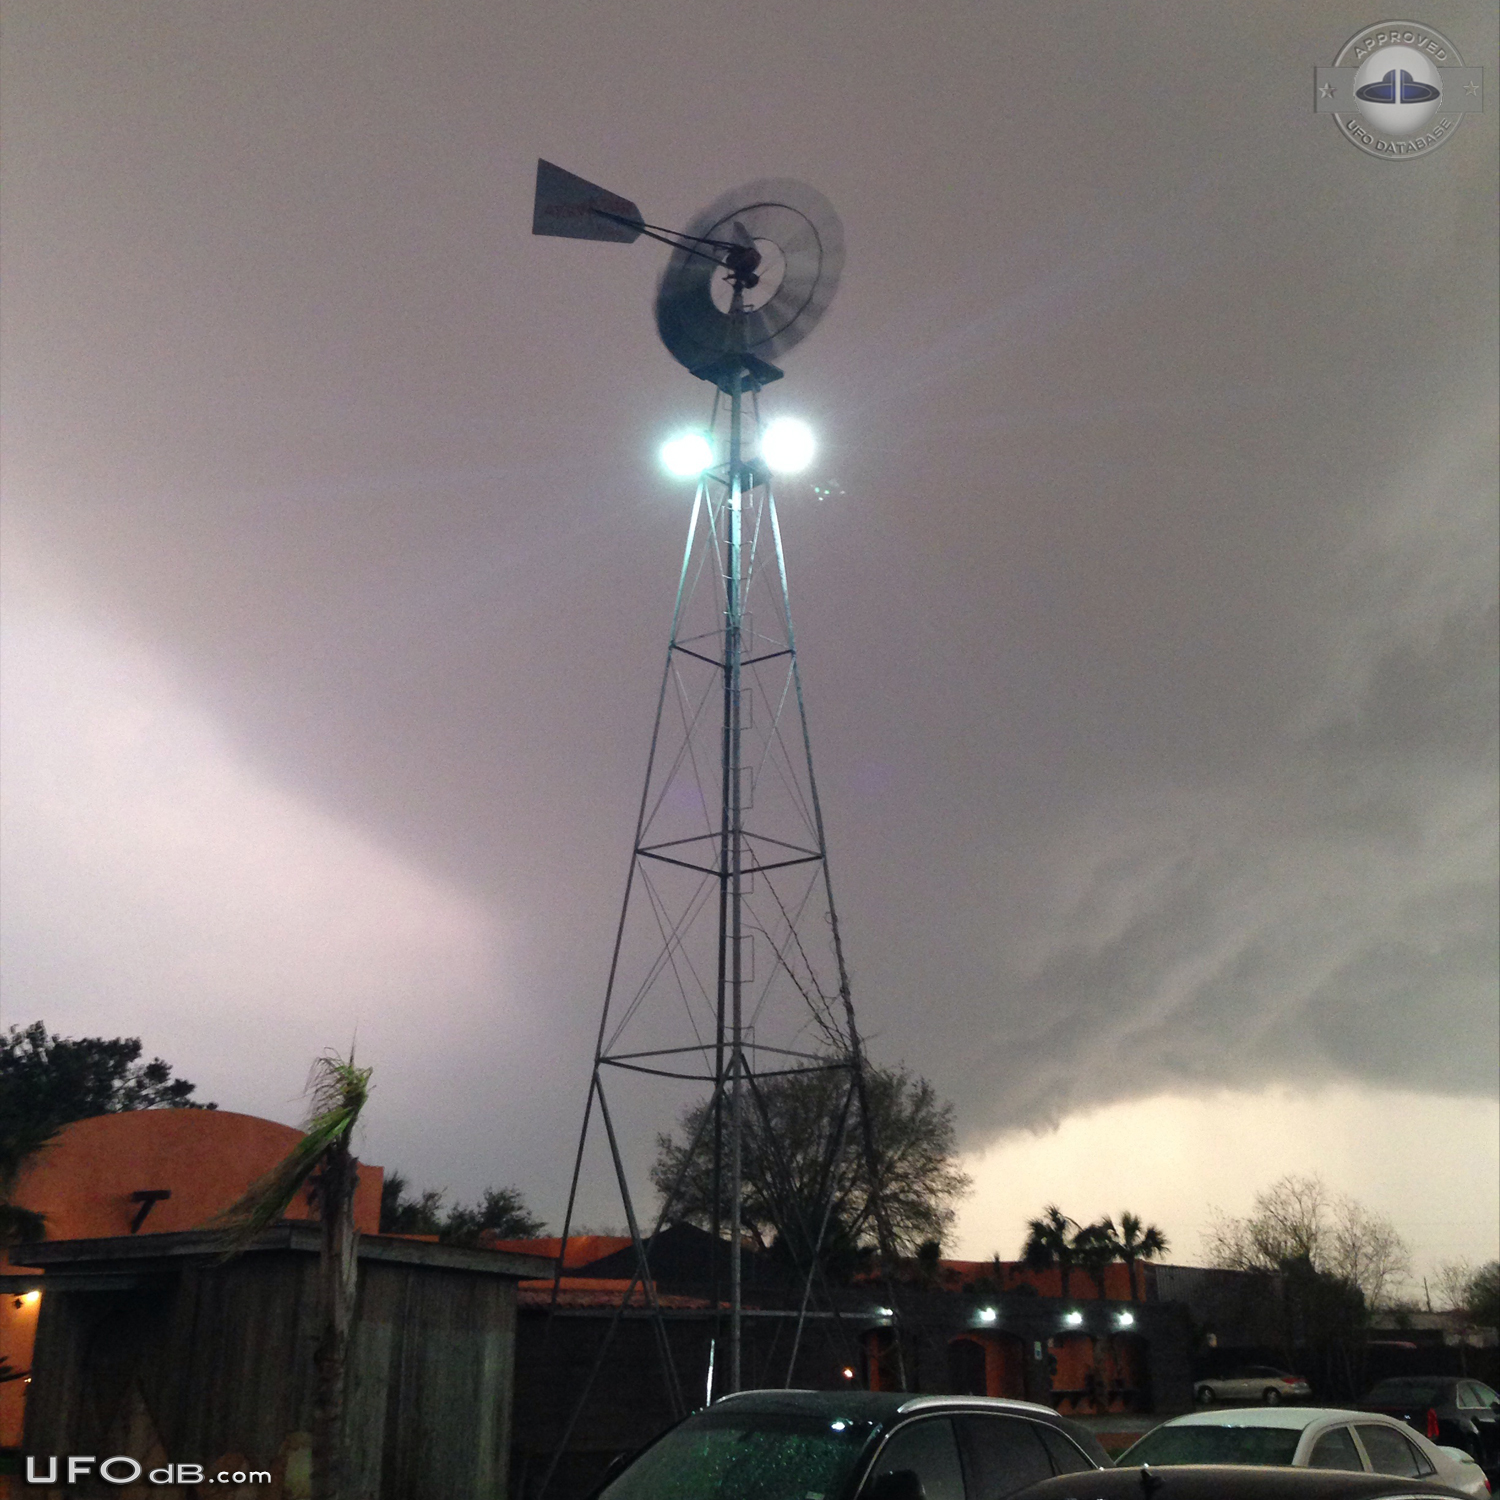 Diamond UFO hiding in the storm caught on picture over Katy Texas 2014 UFO Picture #573-1